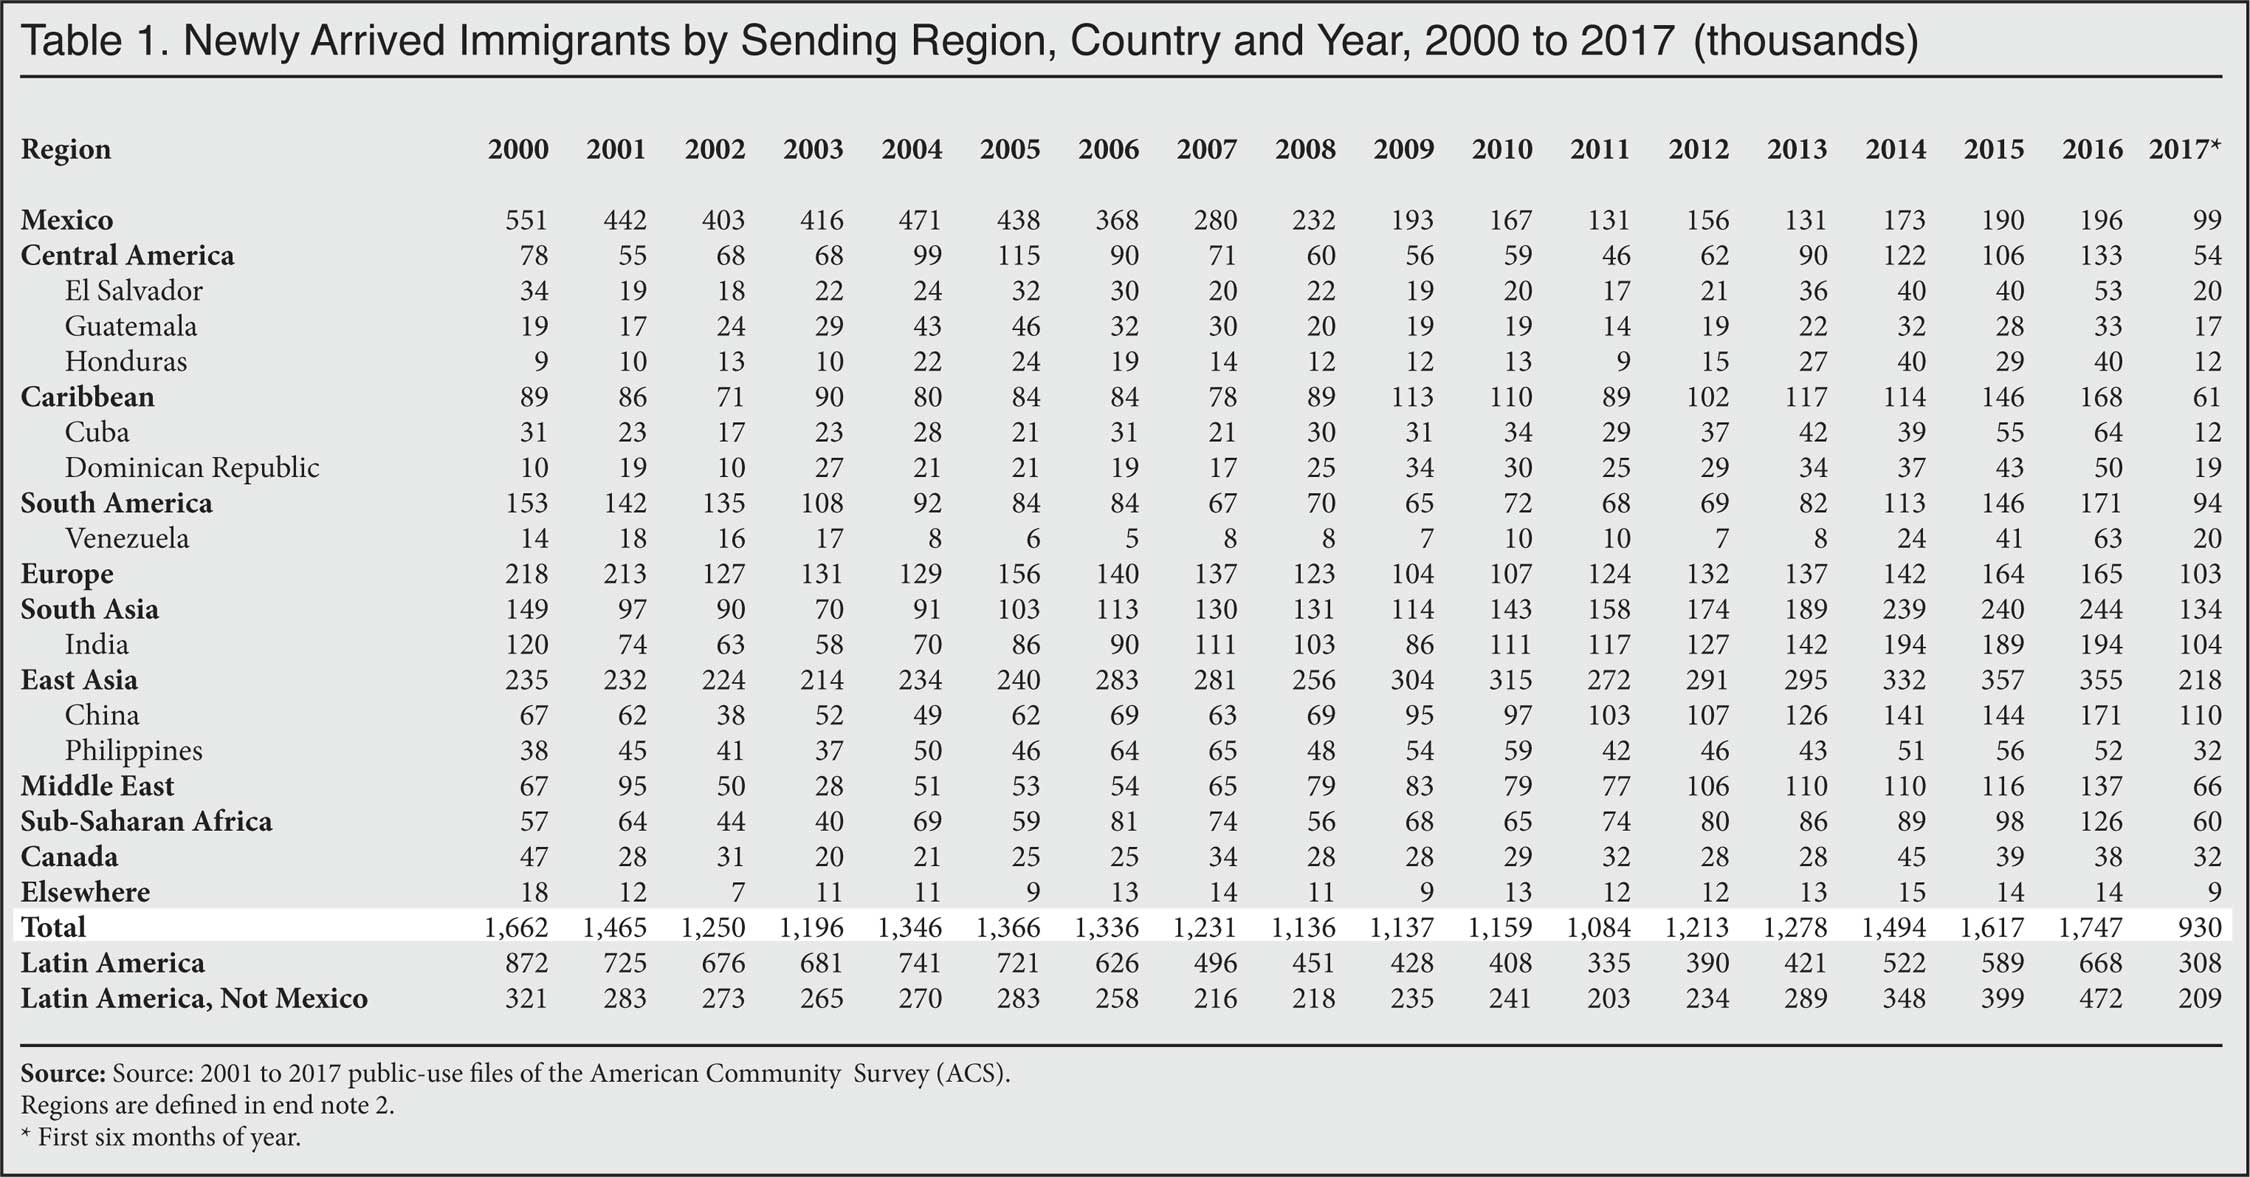 Table: Newly Arrived Immigrants by Sending Region, Country and Year, 2000 - 2017